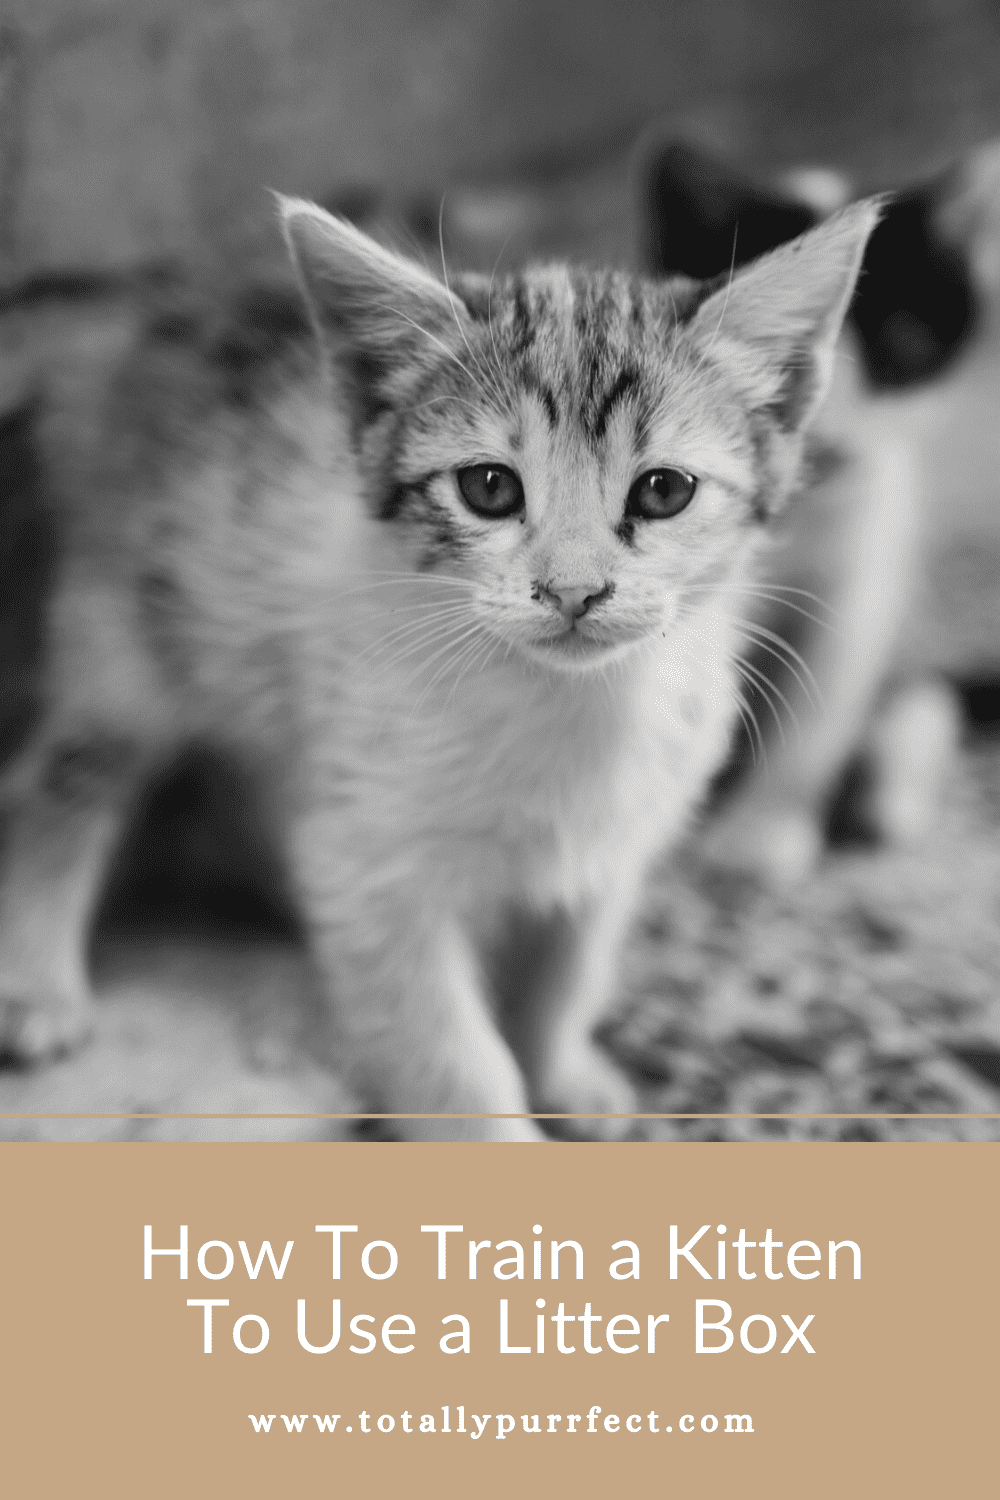 Our guide to kitten litter box training